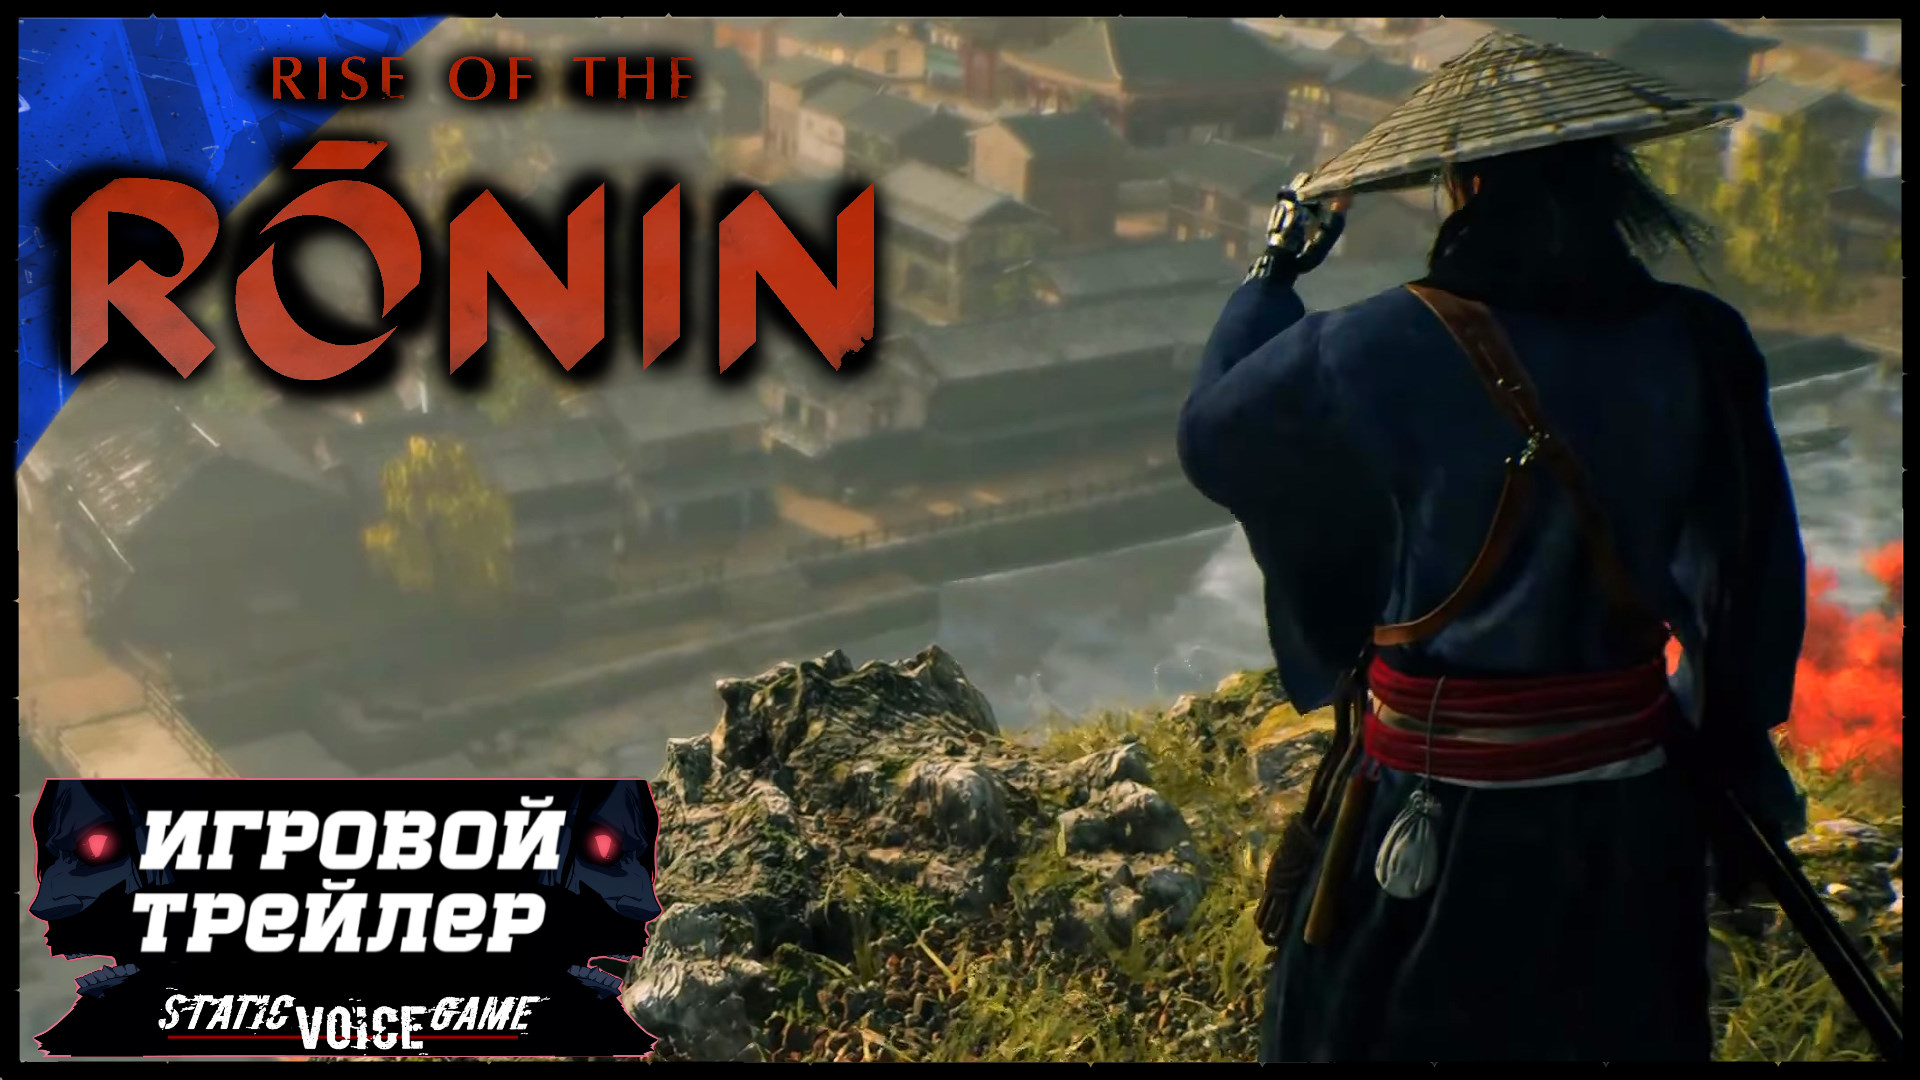 Rise of the ronin системные требования. Rise of the Ronin. Rise of the Ronin 2024. Rise of the Ronin обложка. Ronin игра 2015 Gameplay.